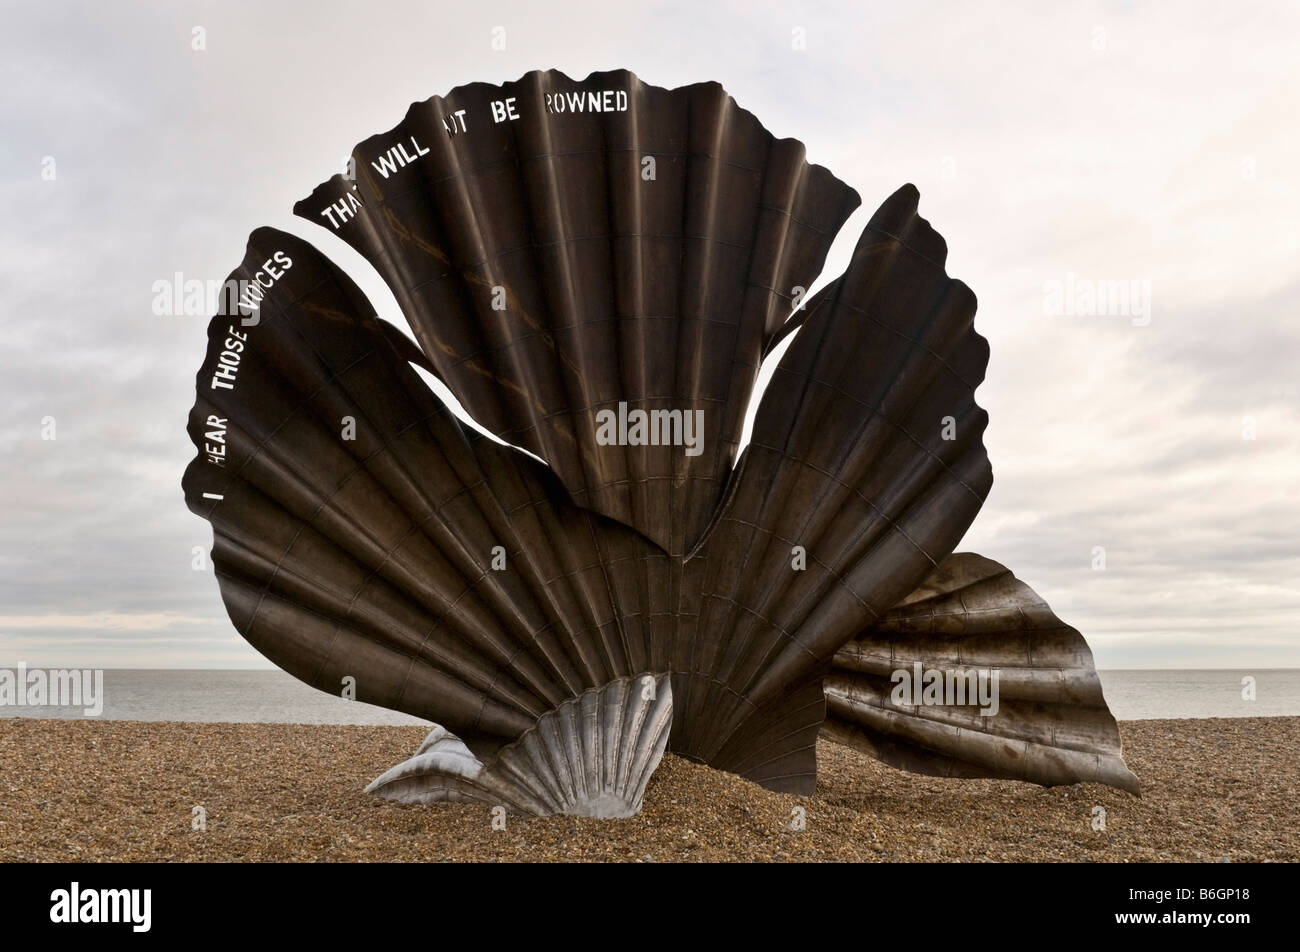 The Scallop sculpture by Maggie Hambling on the beach at Aldeburgh Suffolk Stock Photo